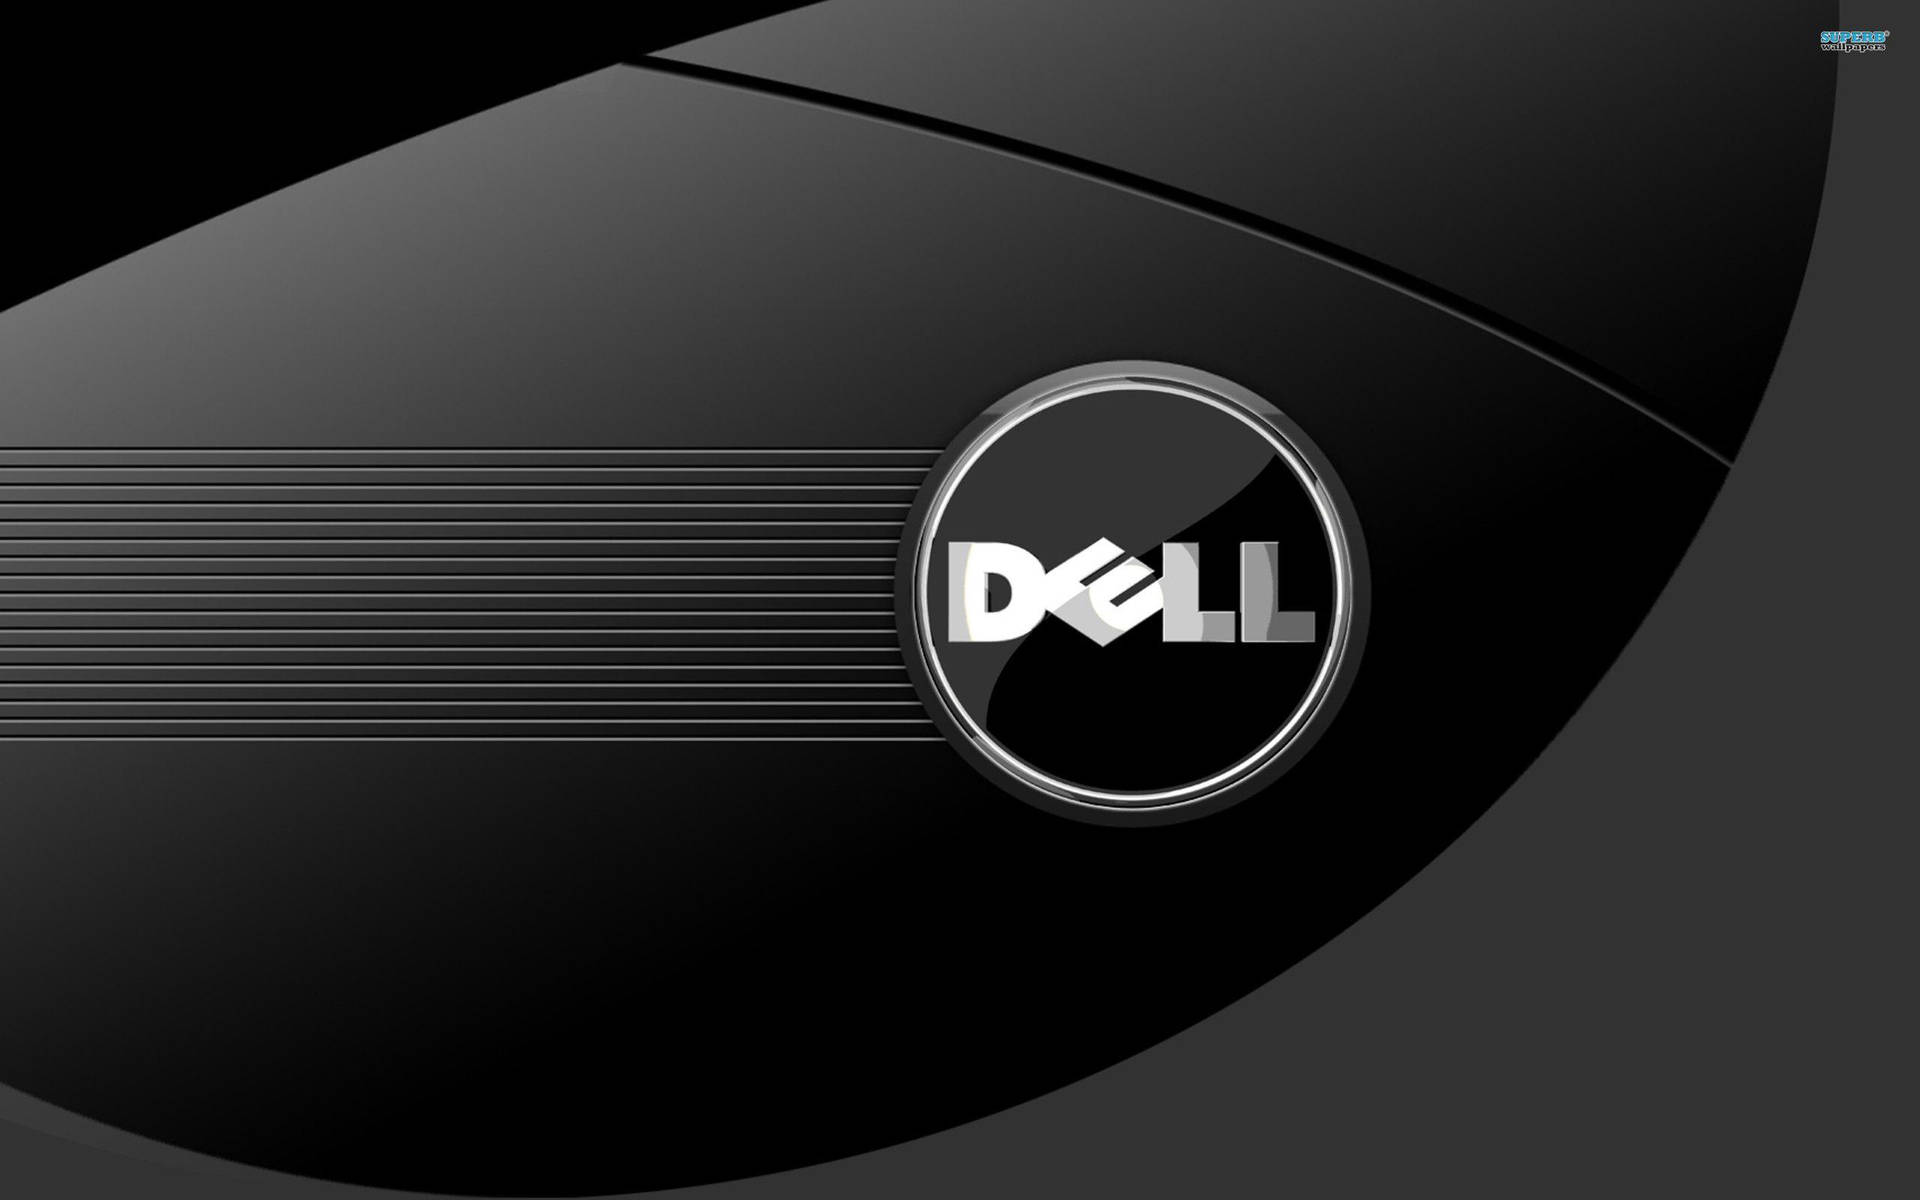 Dell Hd Logo With Stripes Wallpaper